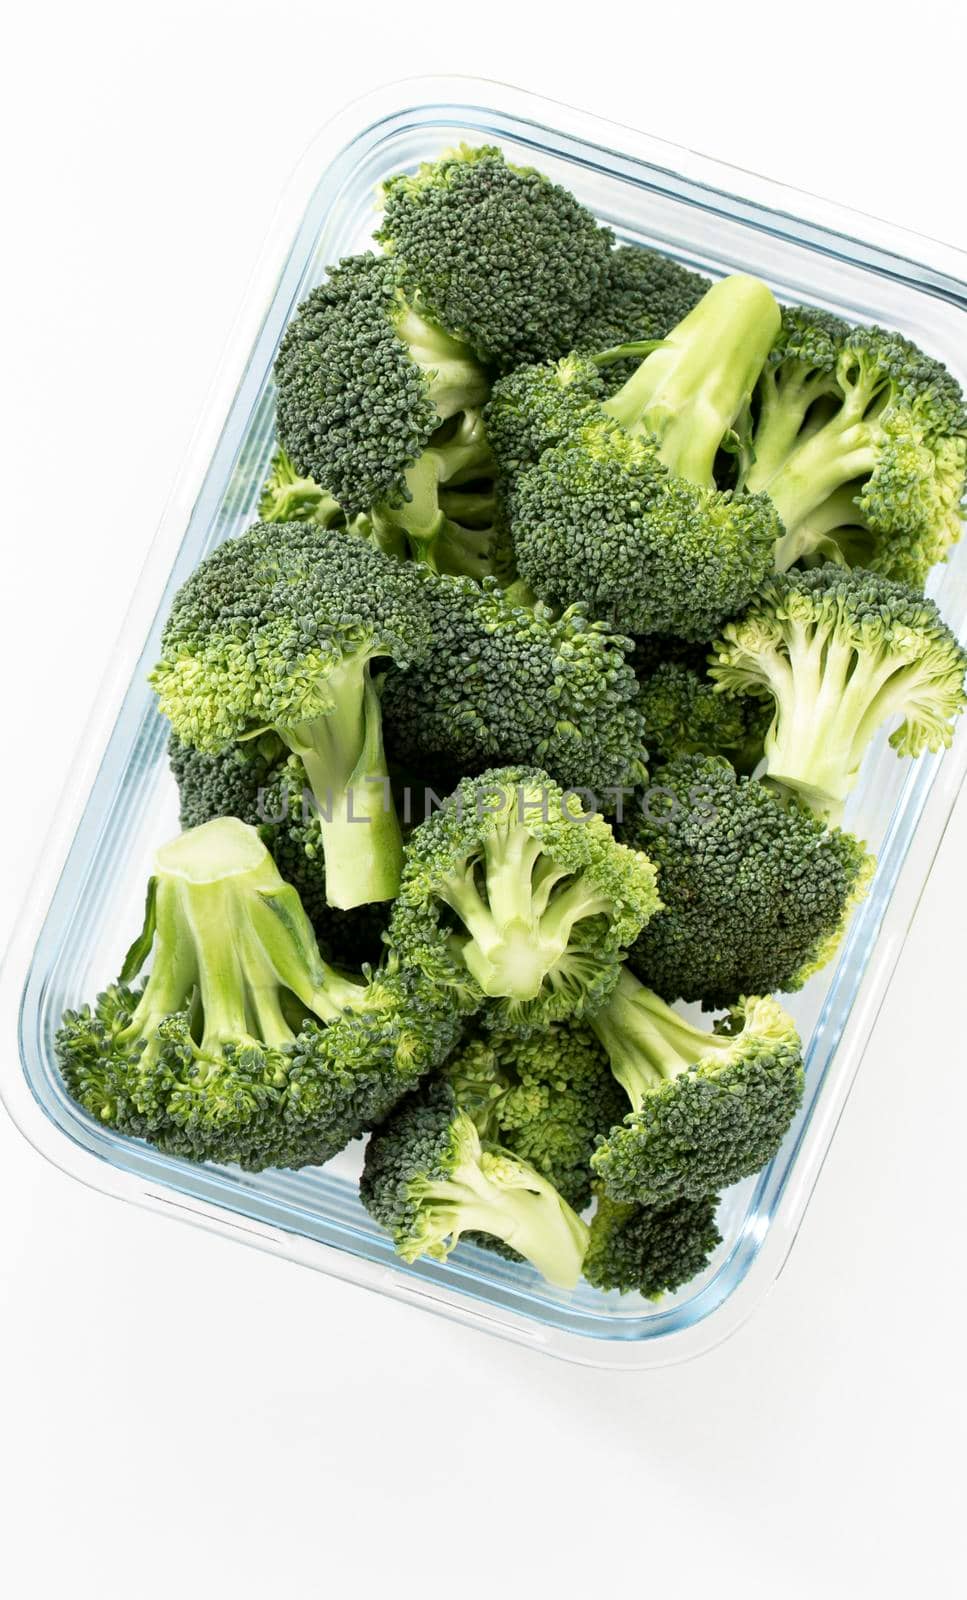 Washed And Sliced Broccoli Crown In Glass Container.V by gitusik